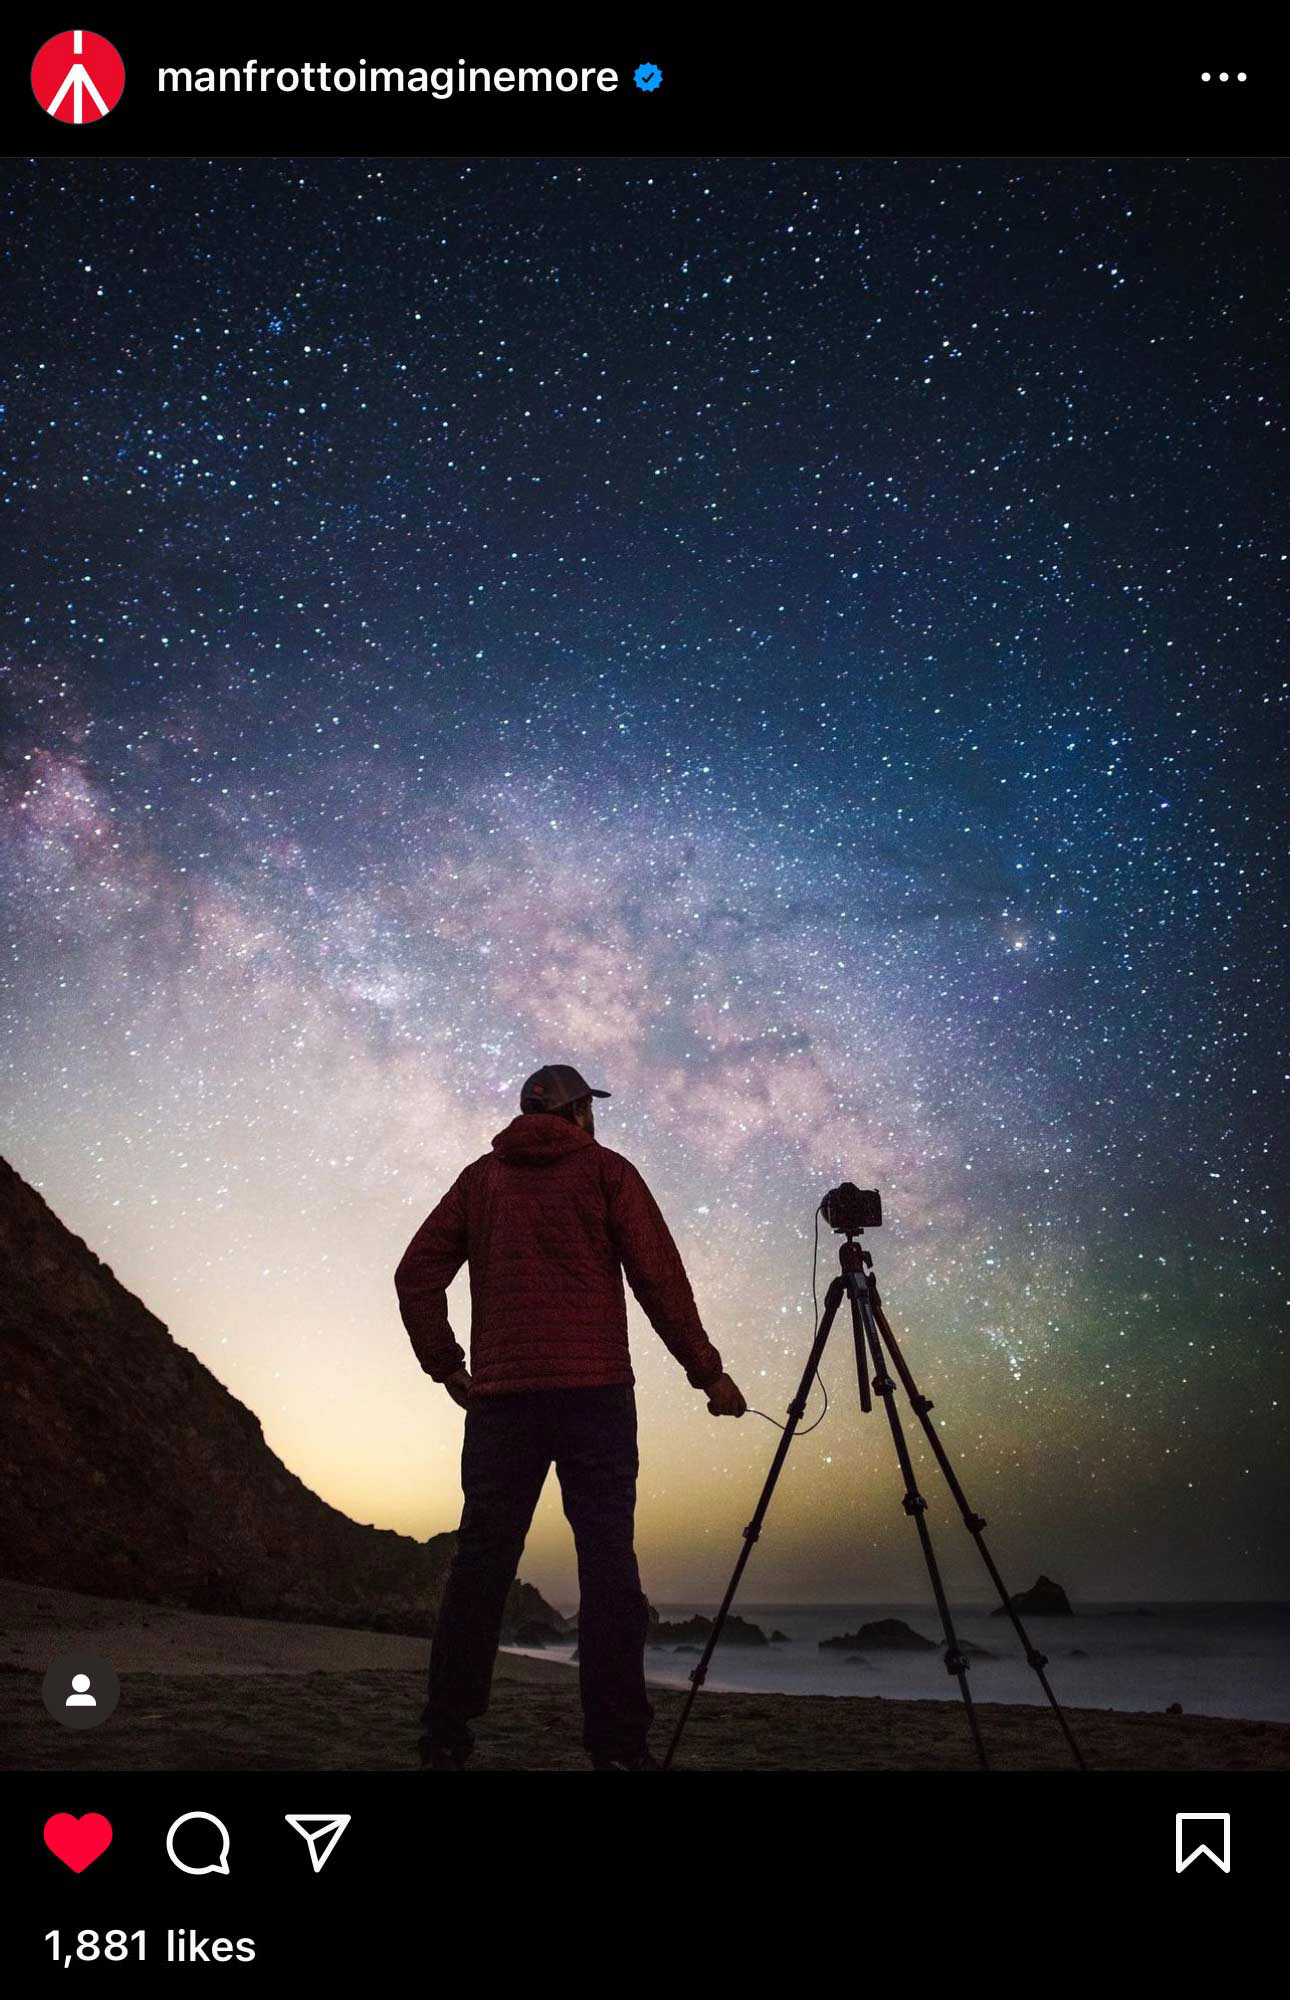 Photographing the Milky Way over the Pacific Ocean for Manfrotto.